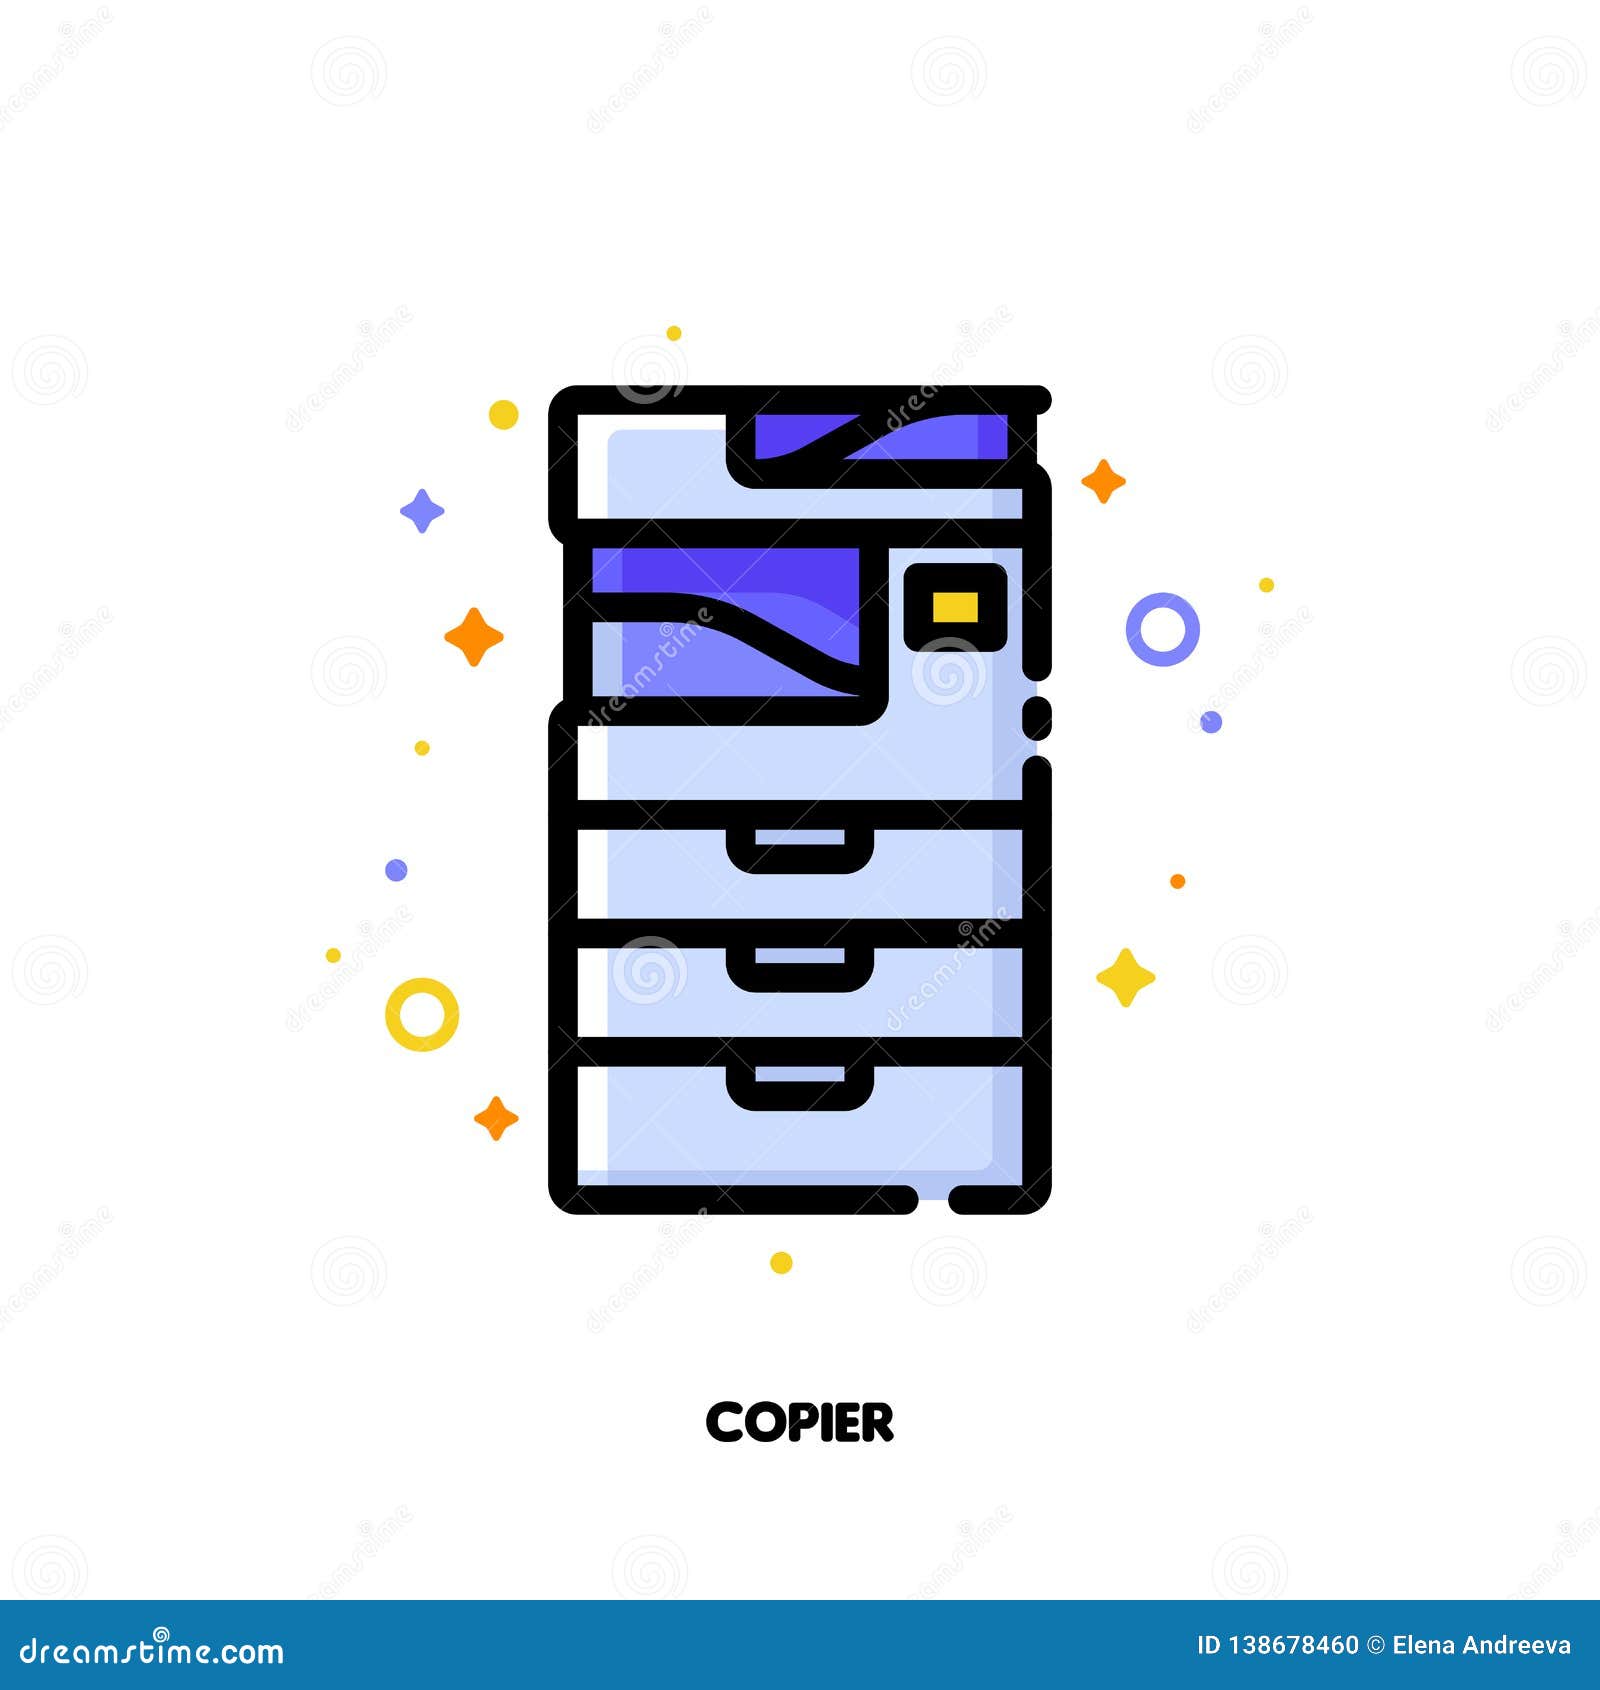 Plantation Repressalier Egenskab Icon of Copier or Multifunction Printer Scanner for Office Work Concept.  Flat Filled Outline Style Stock Vector - Illustration of abstract, concept:  138678460